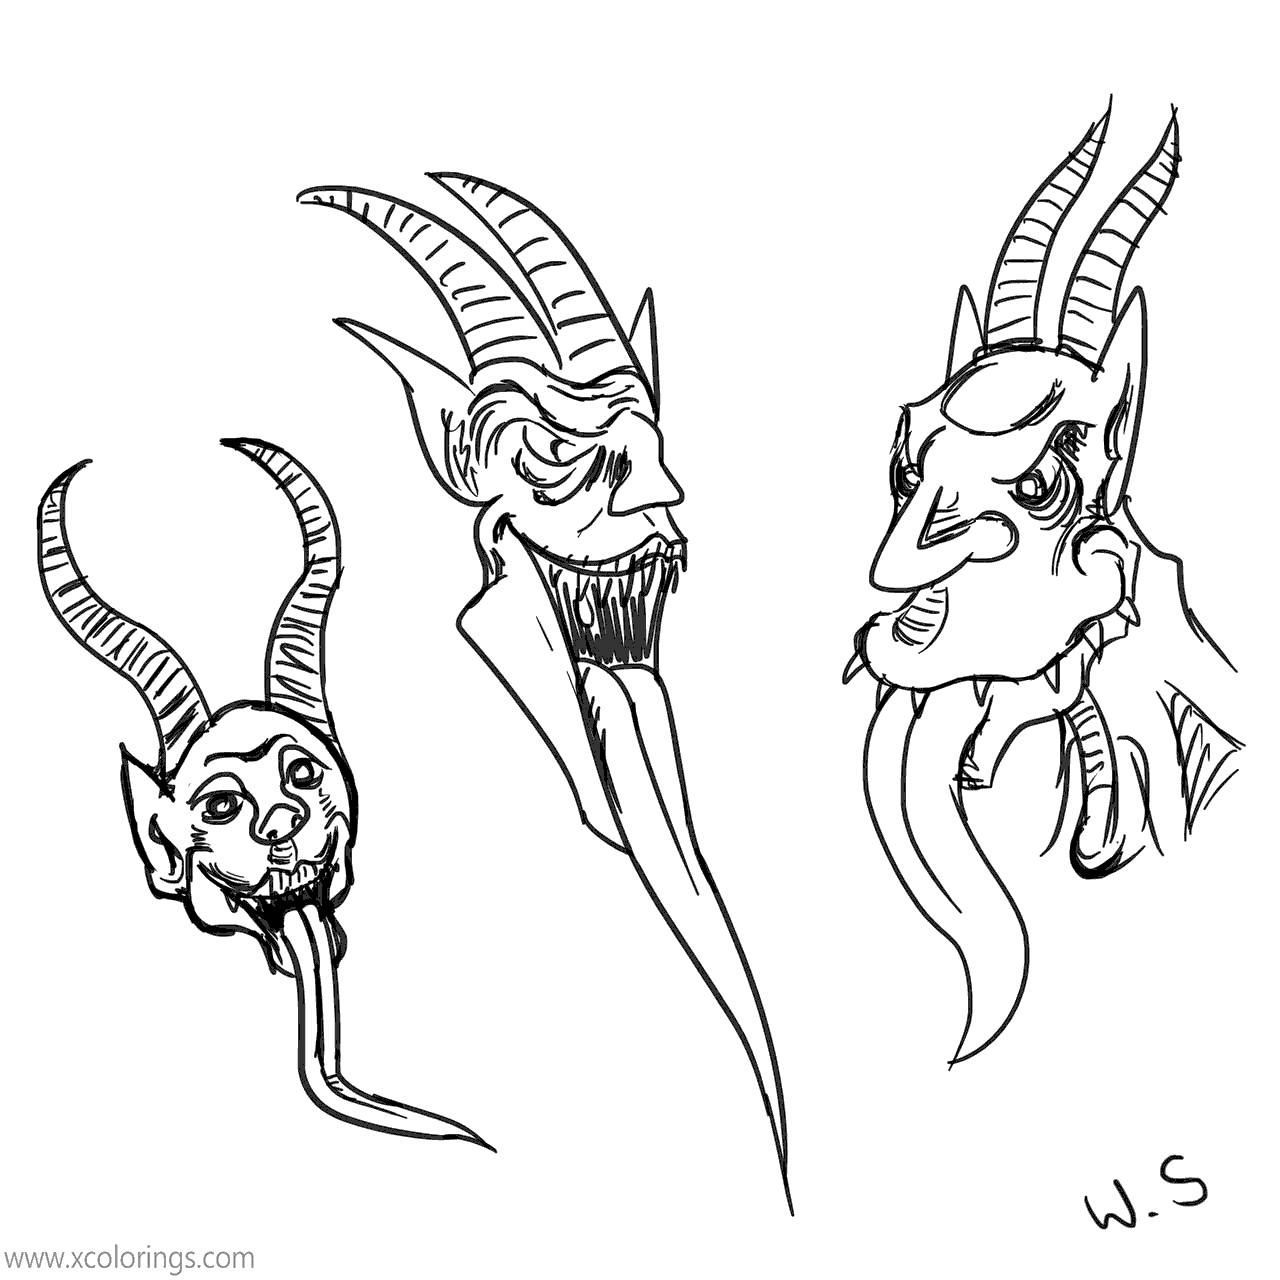 Free Krampus Coloring Pages Drawing by William Scarratt printable